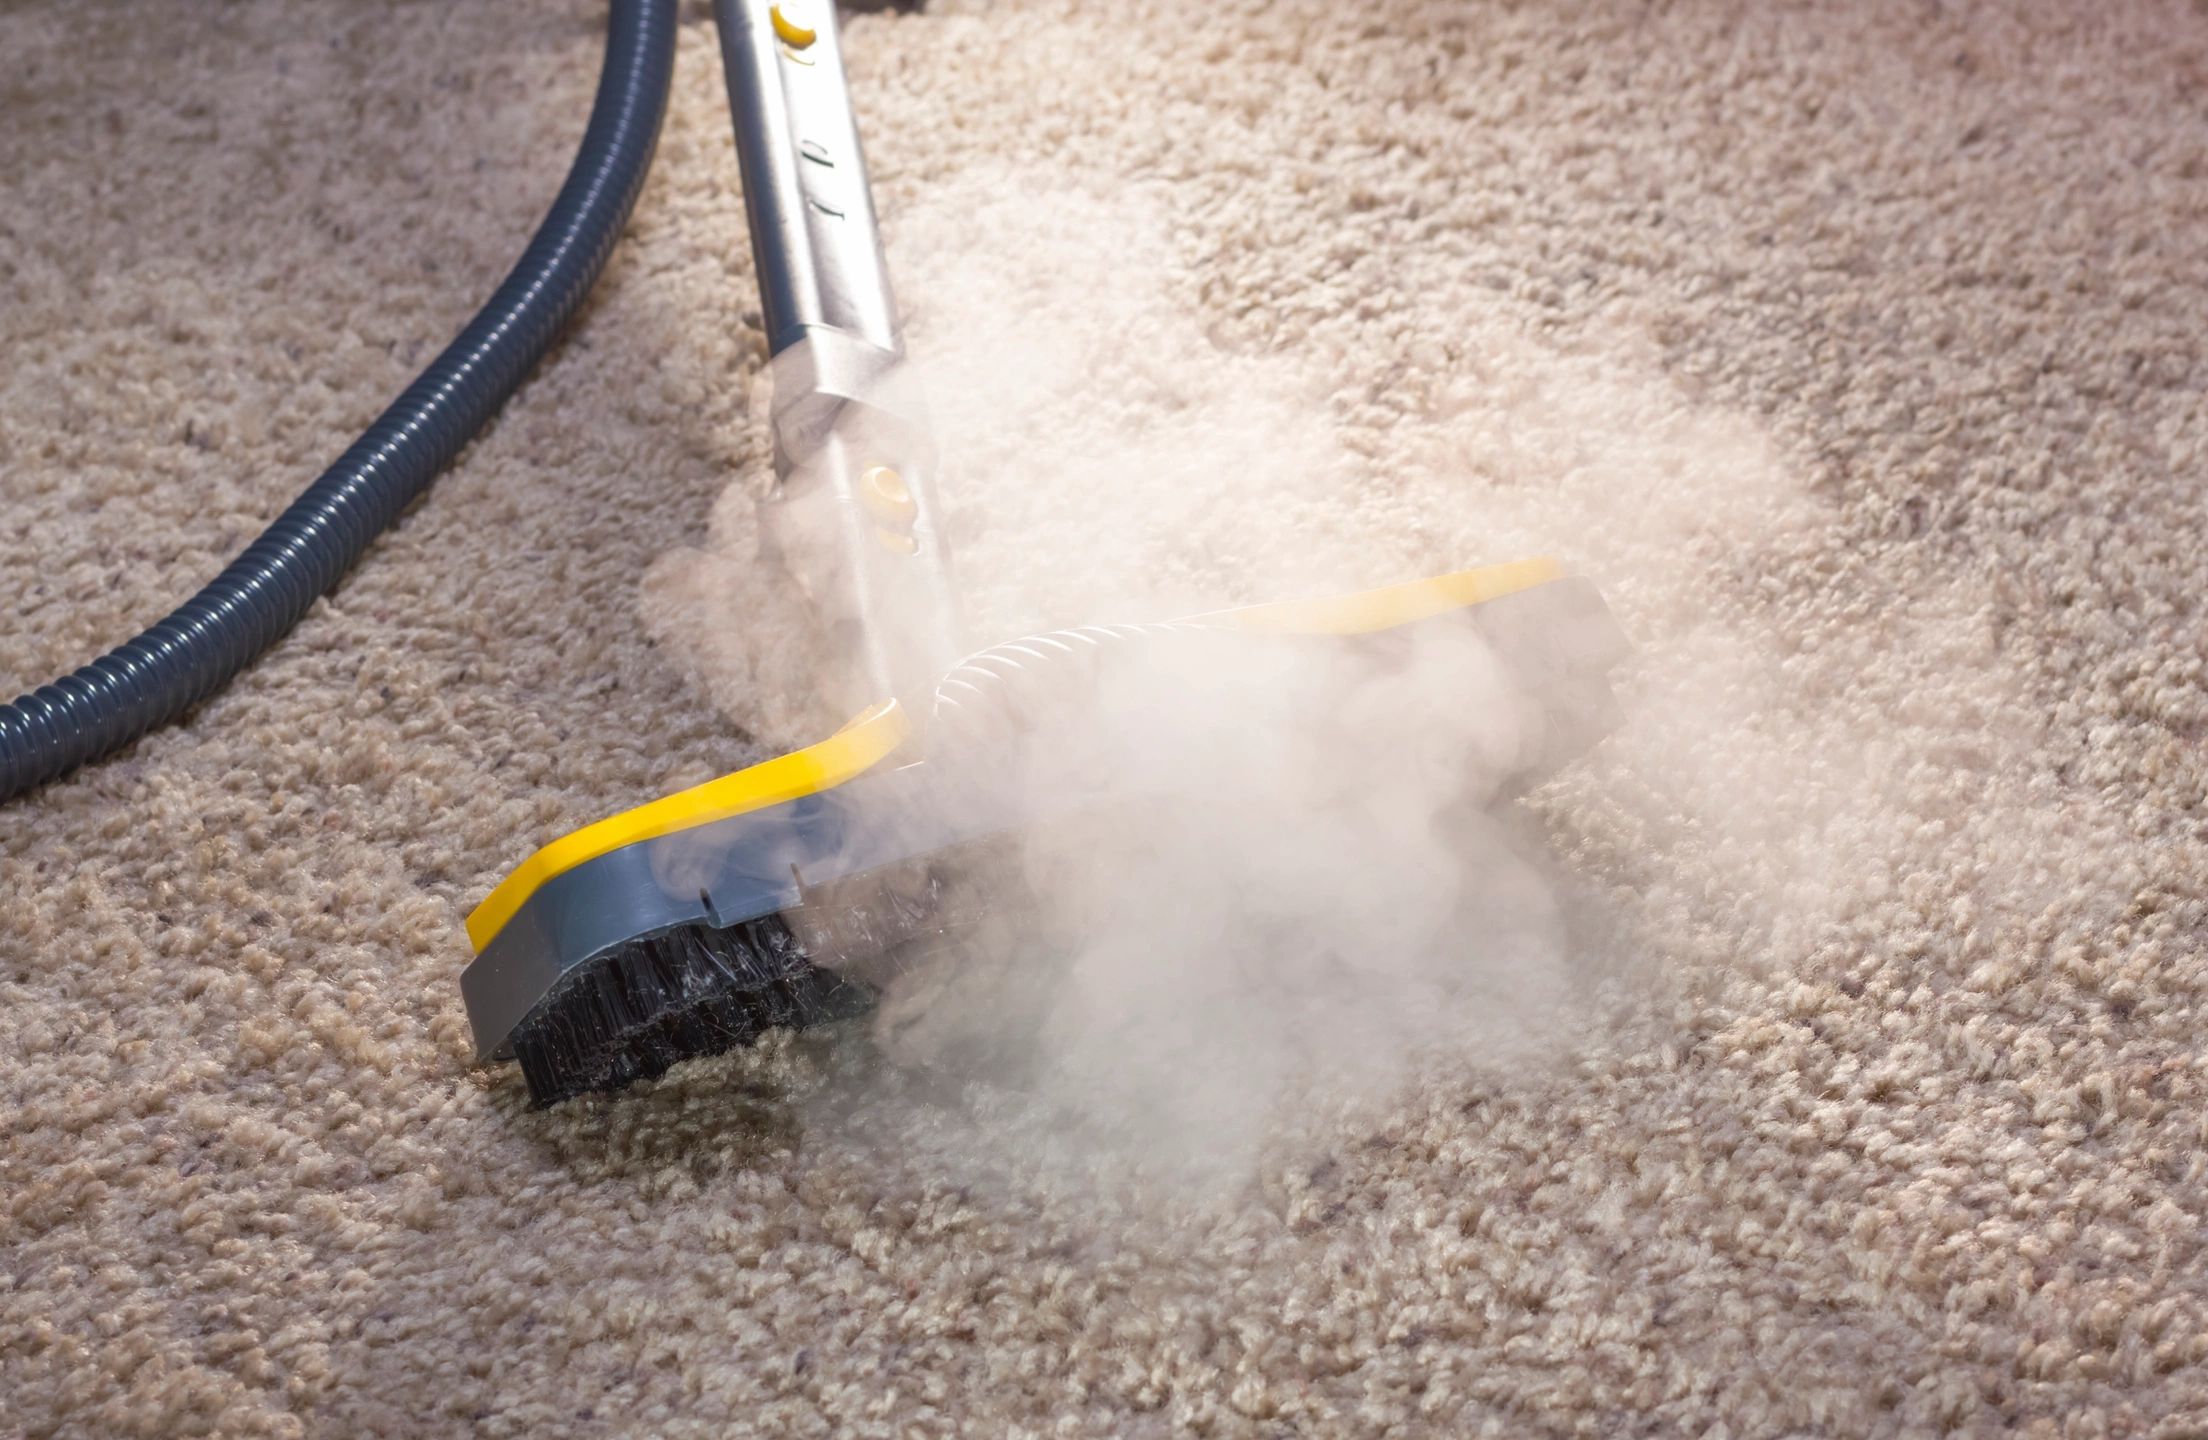 At Zest Carpet Cleaning, we understand the importance of maintaining a clean and healthy home or office environment.